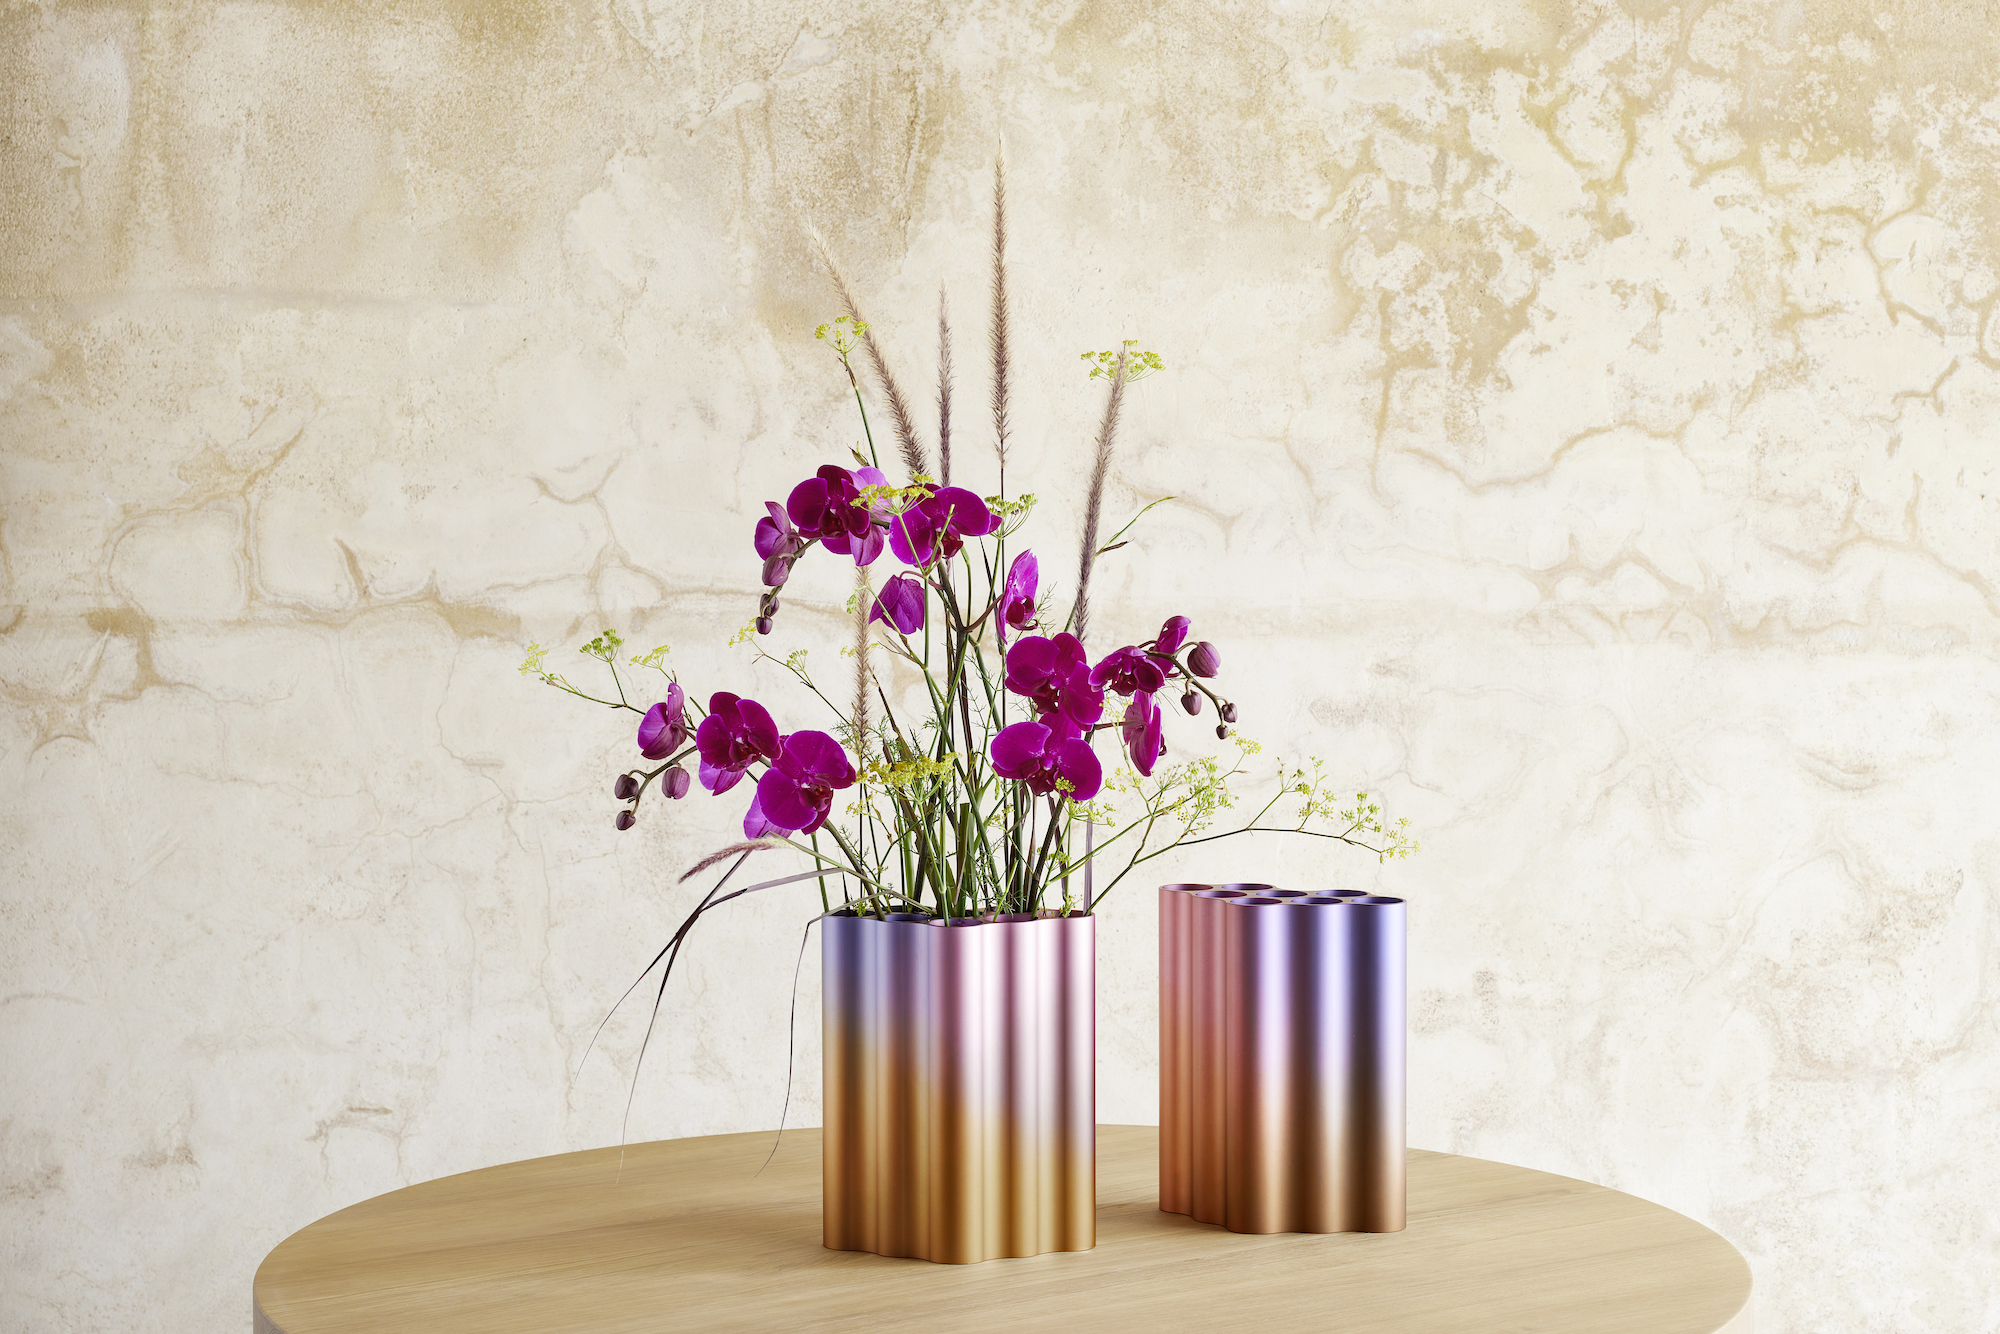 Nuage Abstrait vase, a limited-edition iridescent-finish design by Erwan and Ronan Bouroullec for Vitra - Effect Magazine